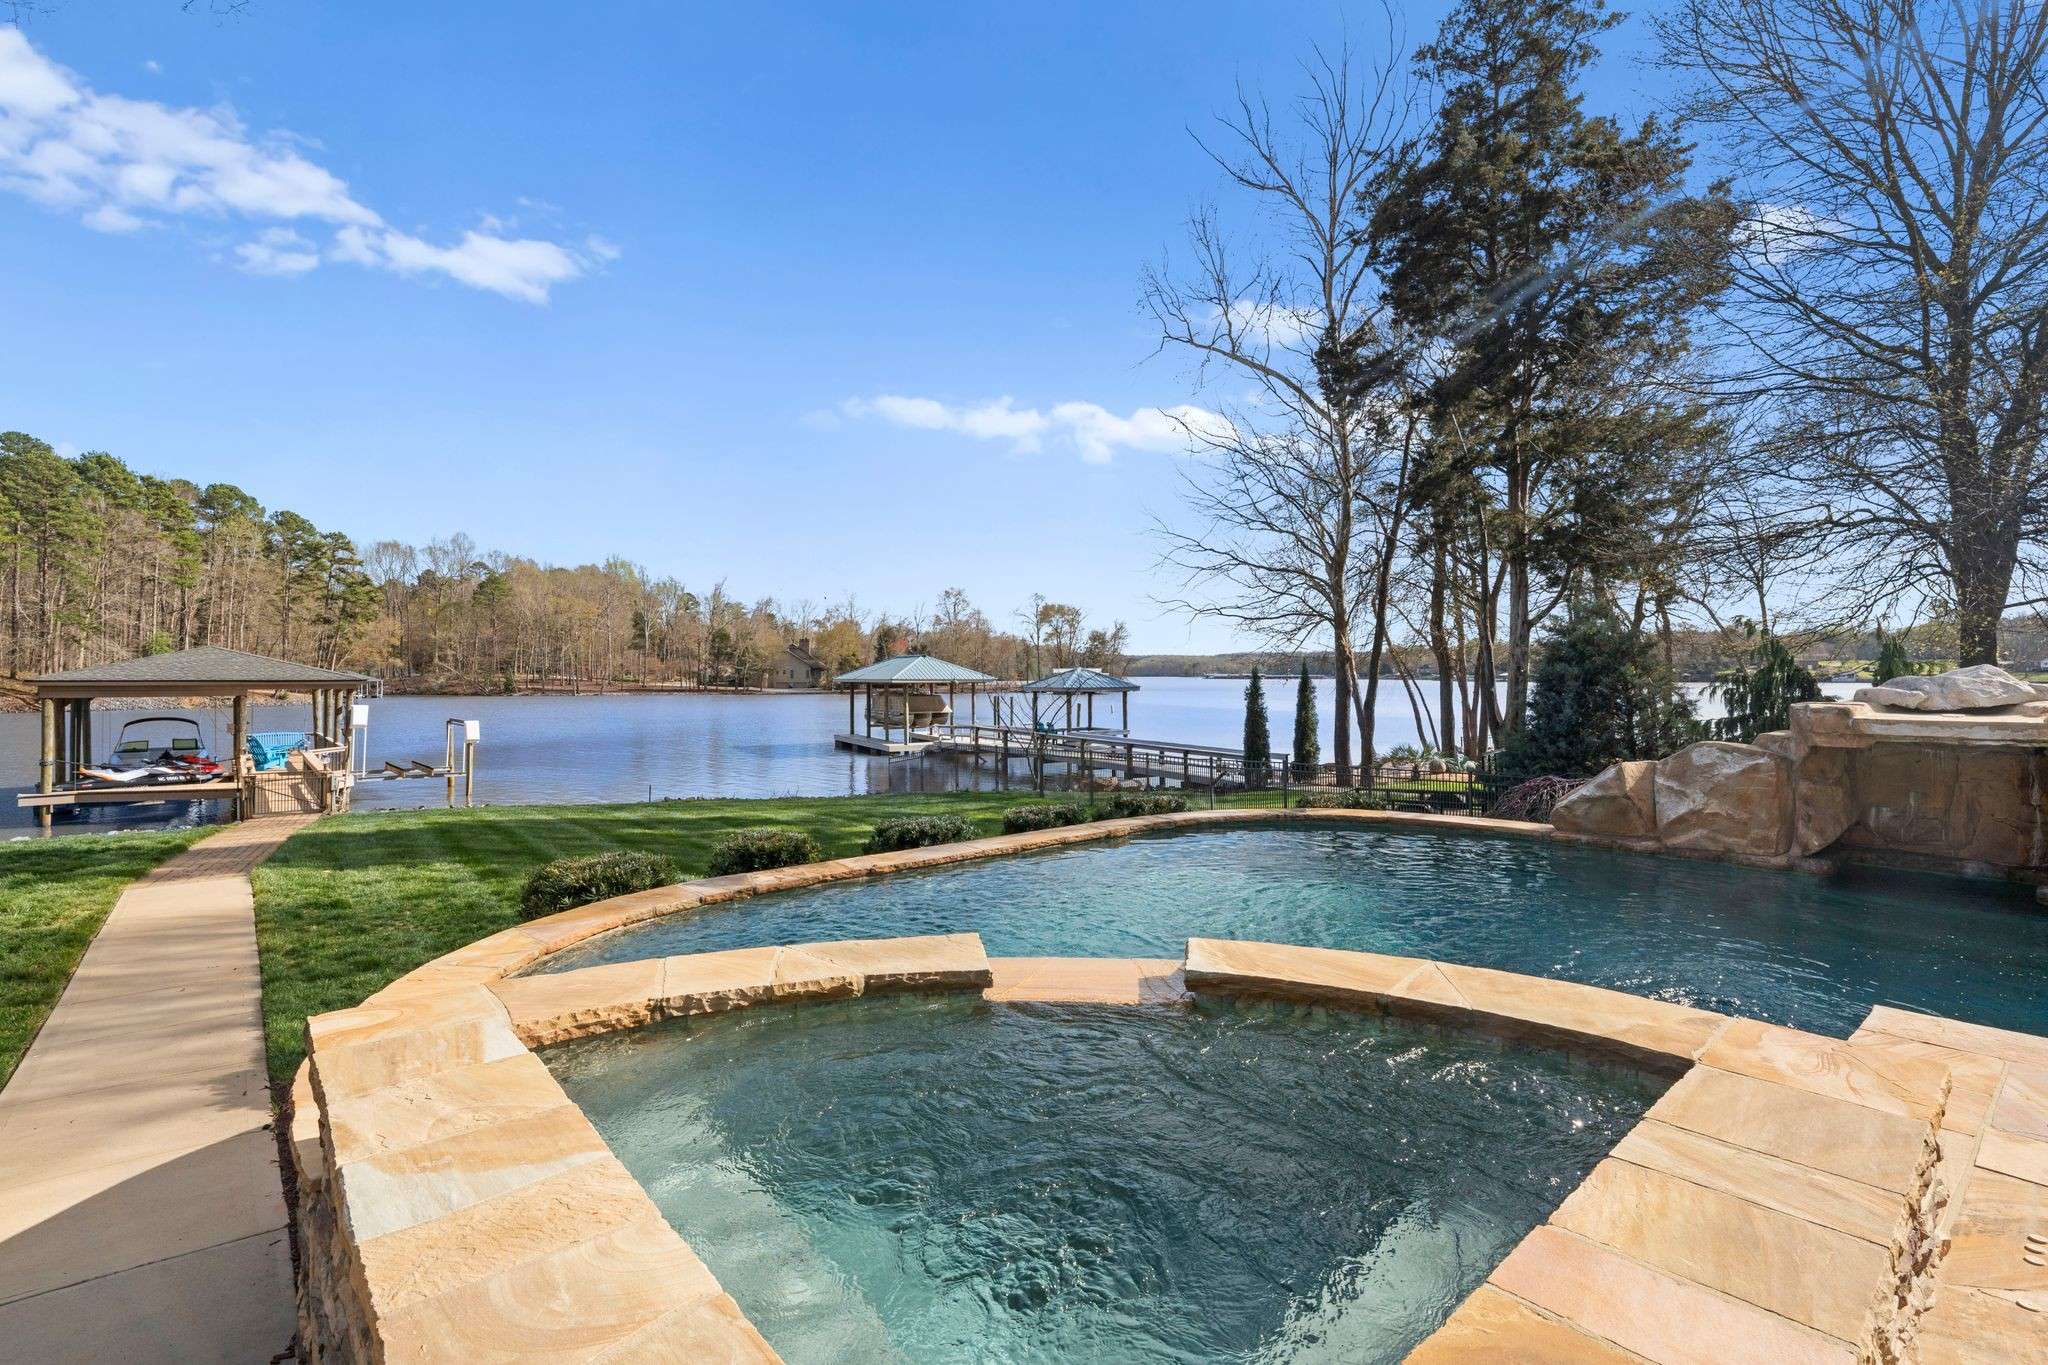 56 of 79. Exterior Day Time Photo - 846 Armstrong Rd - Showcasing Additional Photo from View of Hot Tub overlooking Lake Wylie.